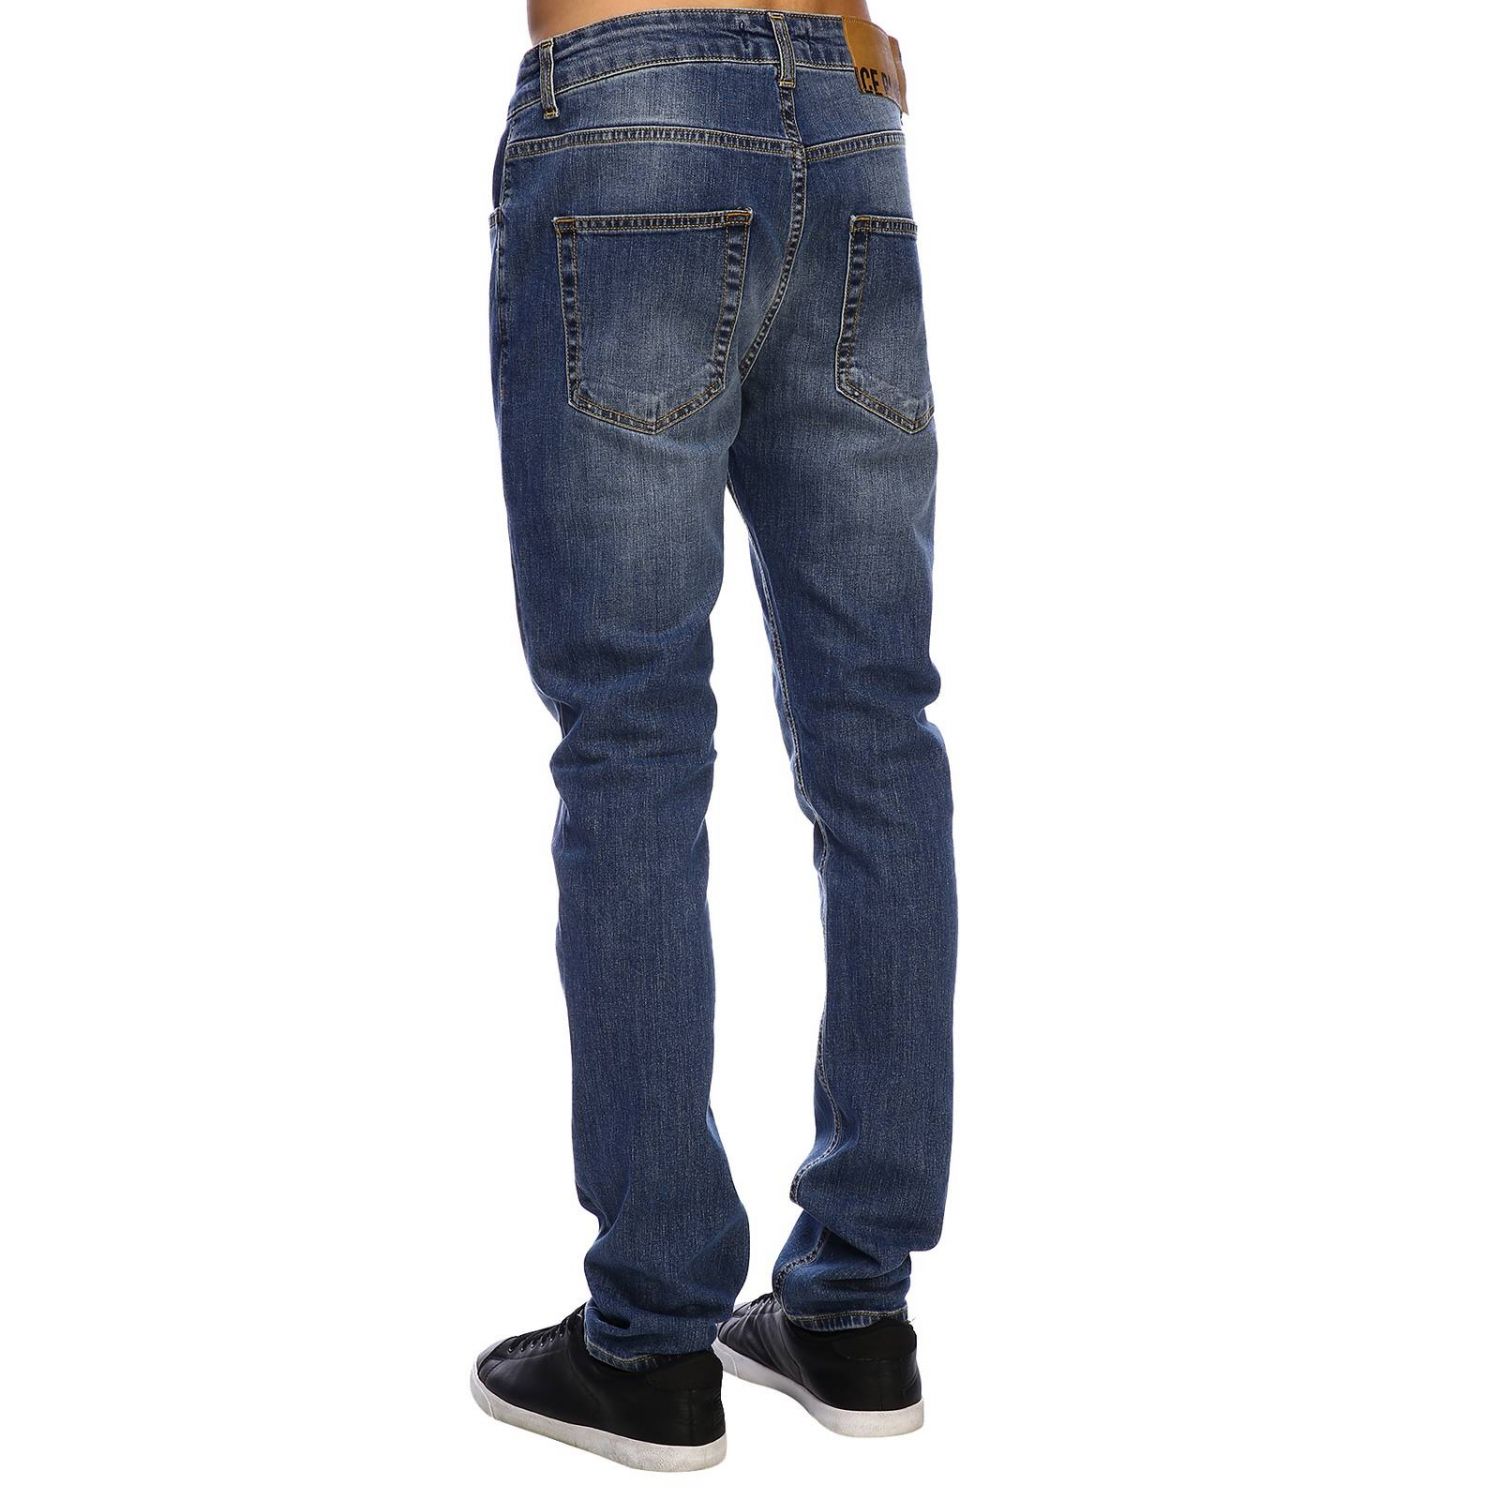 Jeans men Ice Play | Jeans Ice Play Men Denim | Jeans Ice Play 2SK4 ...